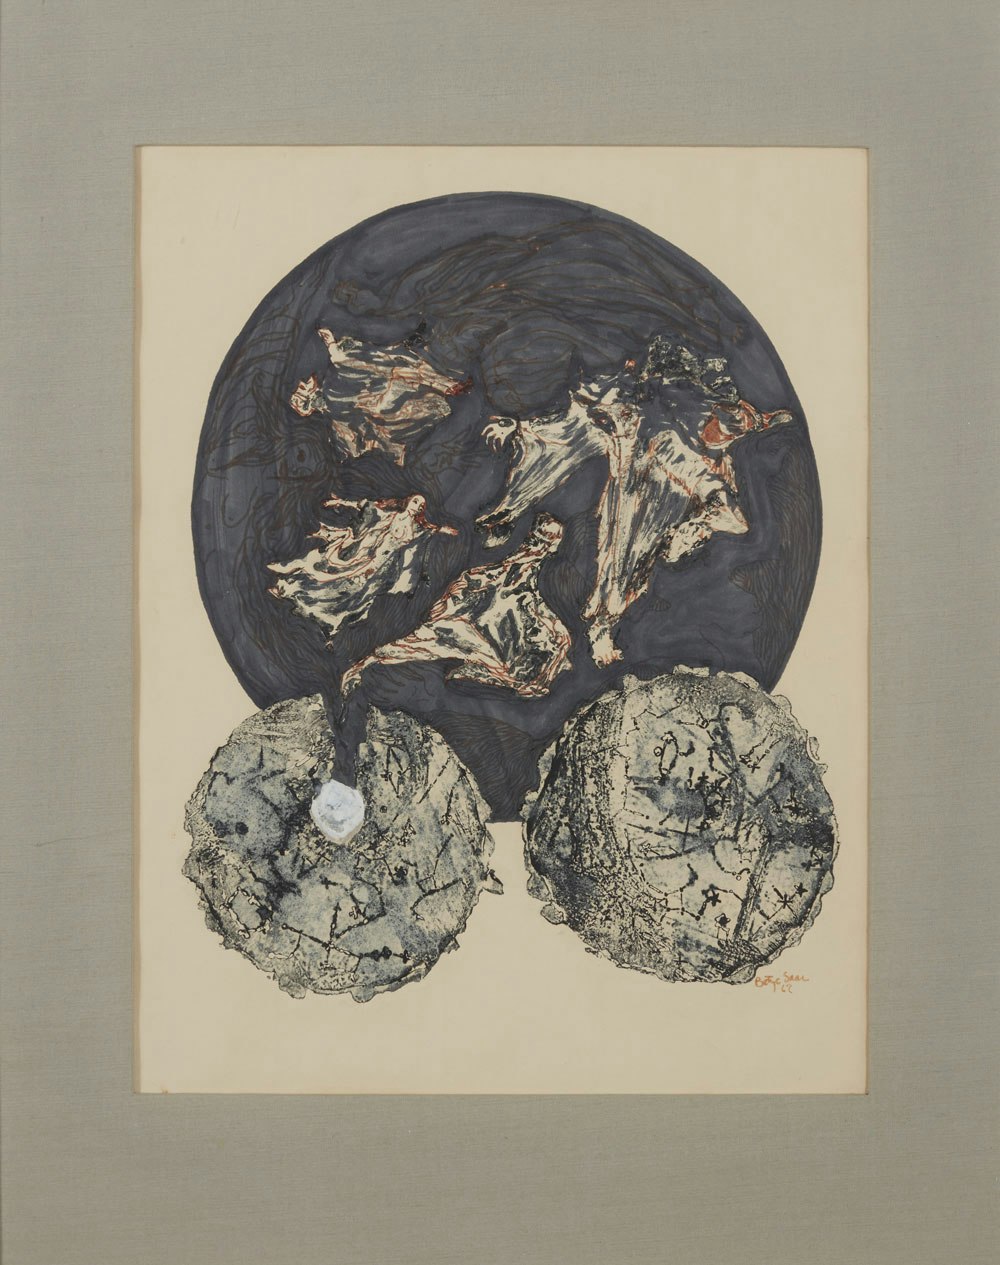 Betye Saar, <em>Taurus</em>, 1967. Intaglio print, ink, and watercolor on paper, 13 1/2 x 21 1/2 inches. Courtesy the artist and Ortuzar Projects, New York. Photo: Timothy Doyon.